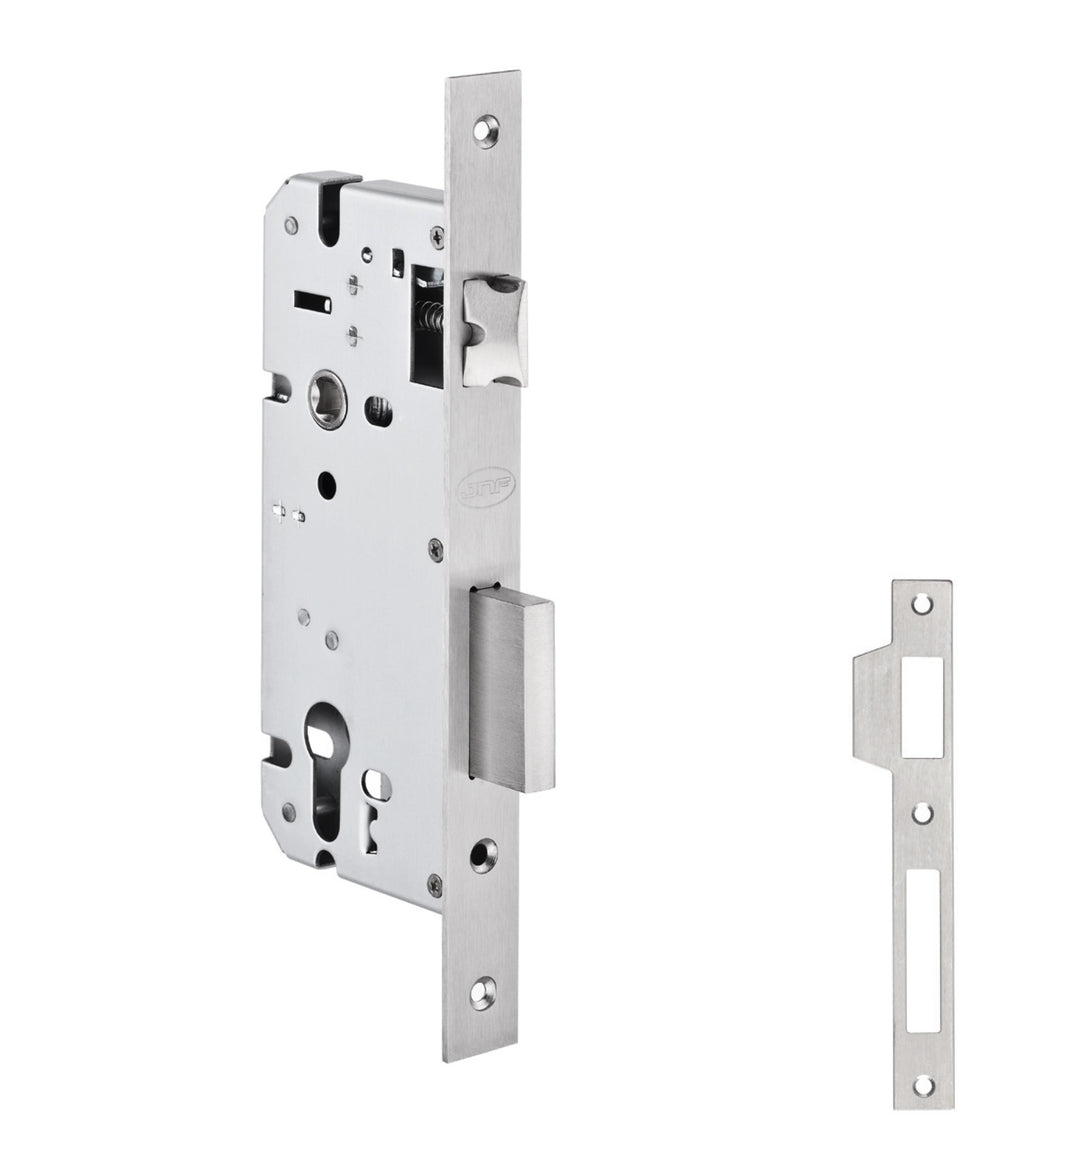 IN.20.792.60 Mortice lock for european cylinder (60 - 85mm)